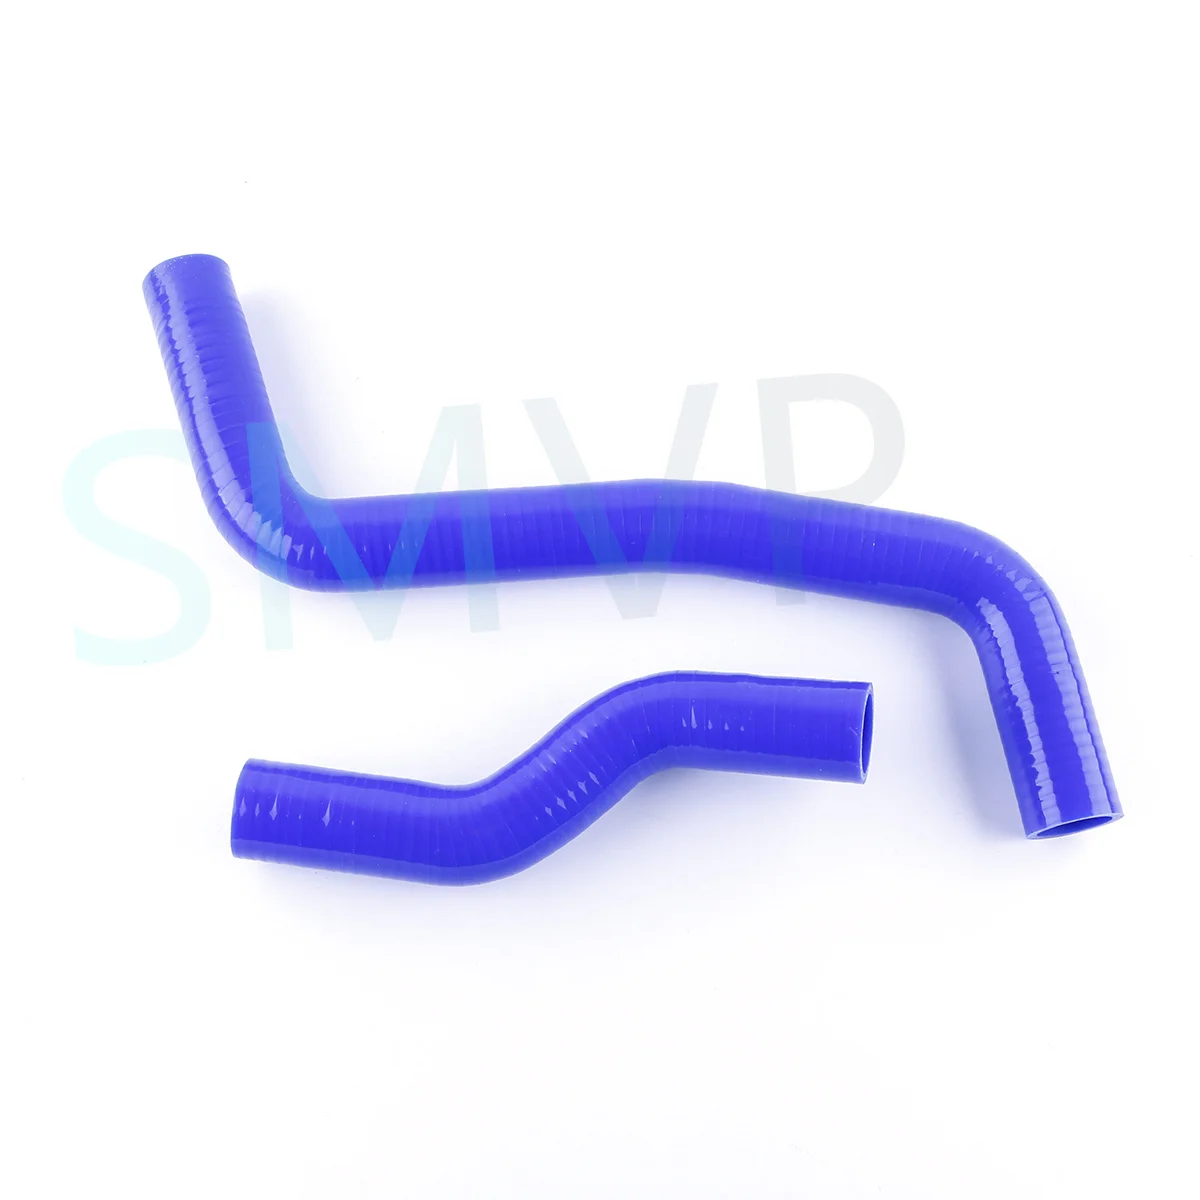 

2PCS Silicone Radiator Hose For 1995-2000 Toyota Corolla Levin AE101G AE111 4A-GE 20V Replacement Part 1996 1997 1998 1999